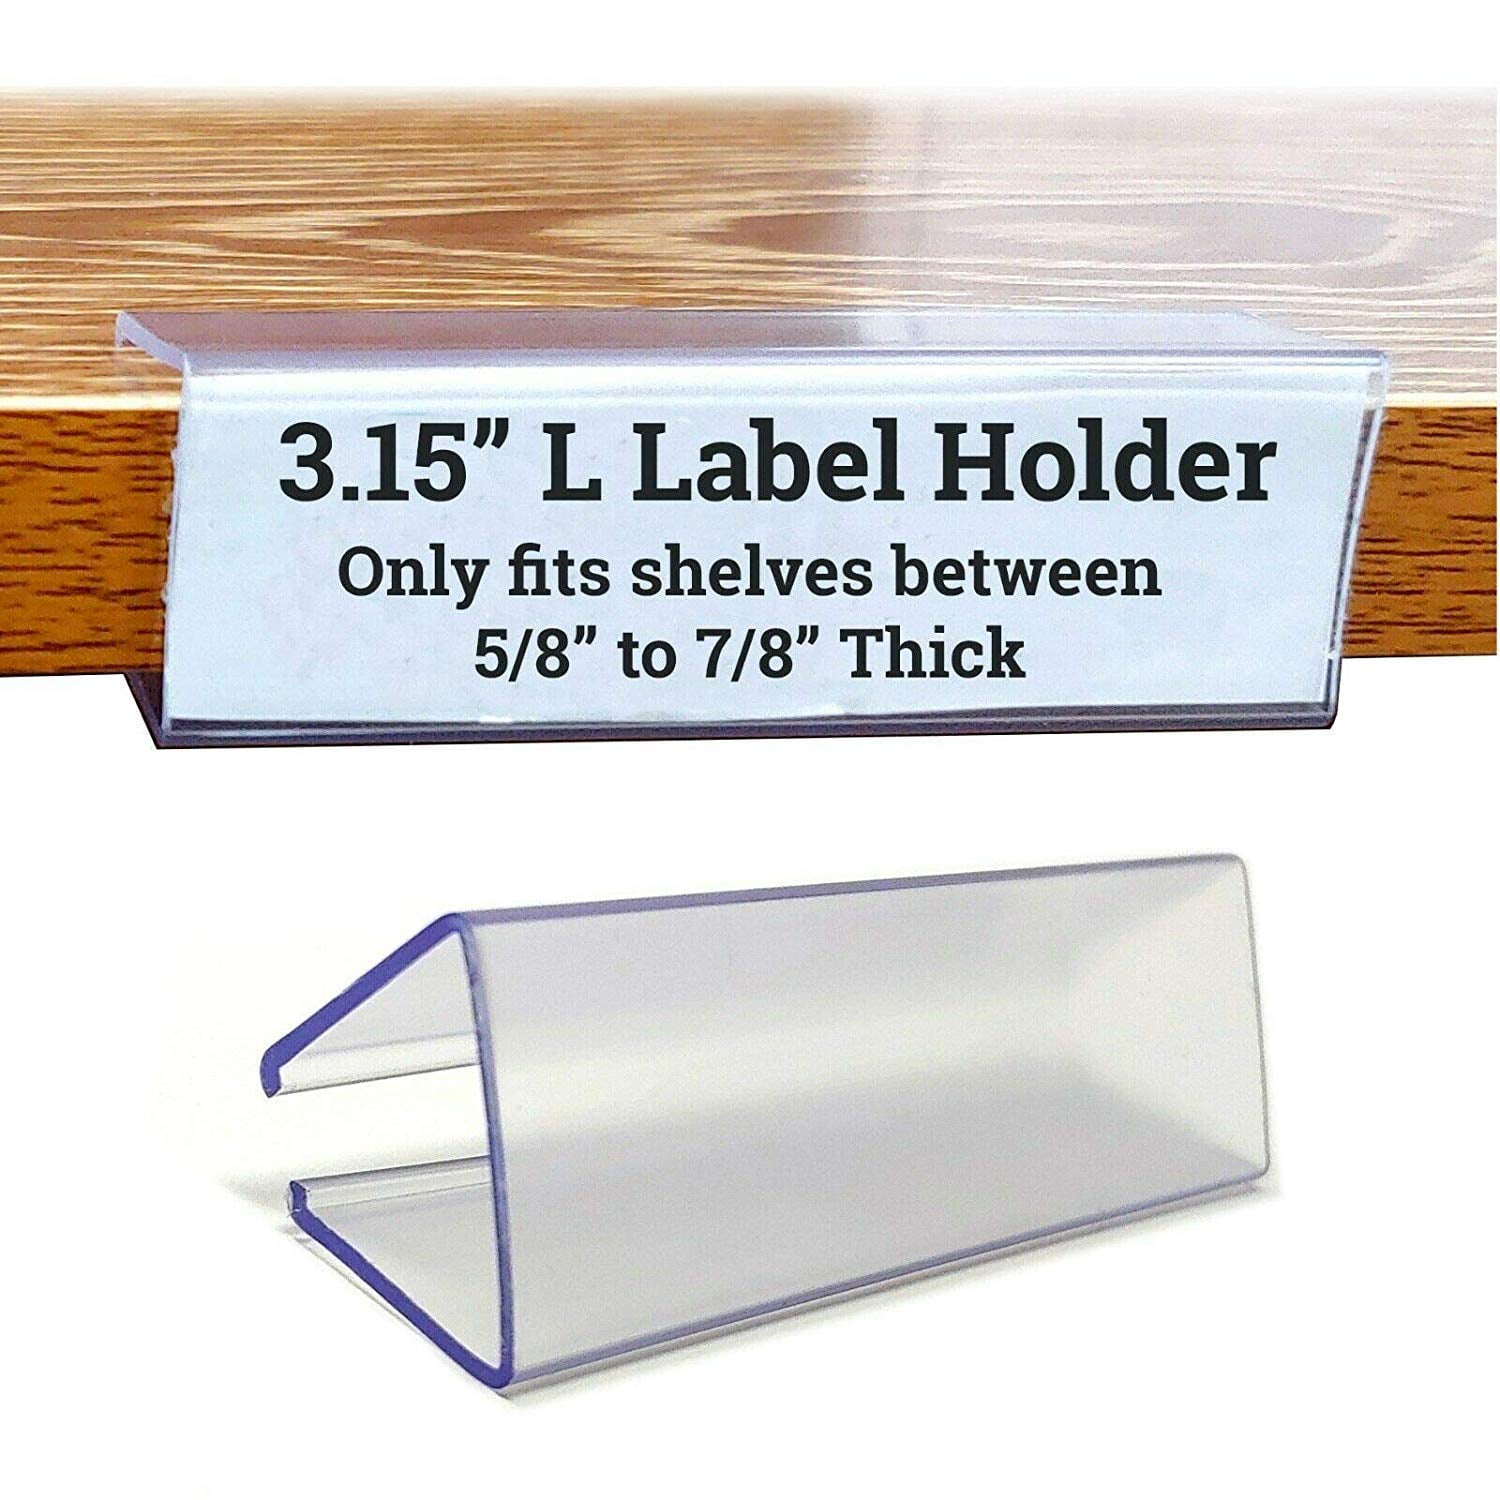 Details about   LABLE HOLDER  QYT 50 CLEAR FOR SHELVES  7"x2.5" 